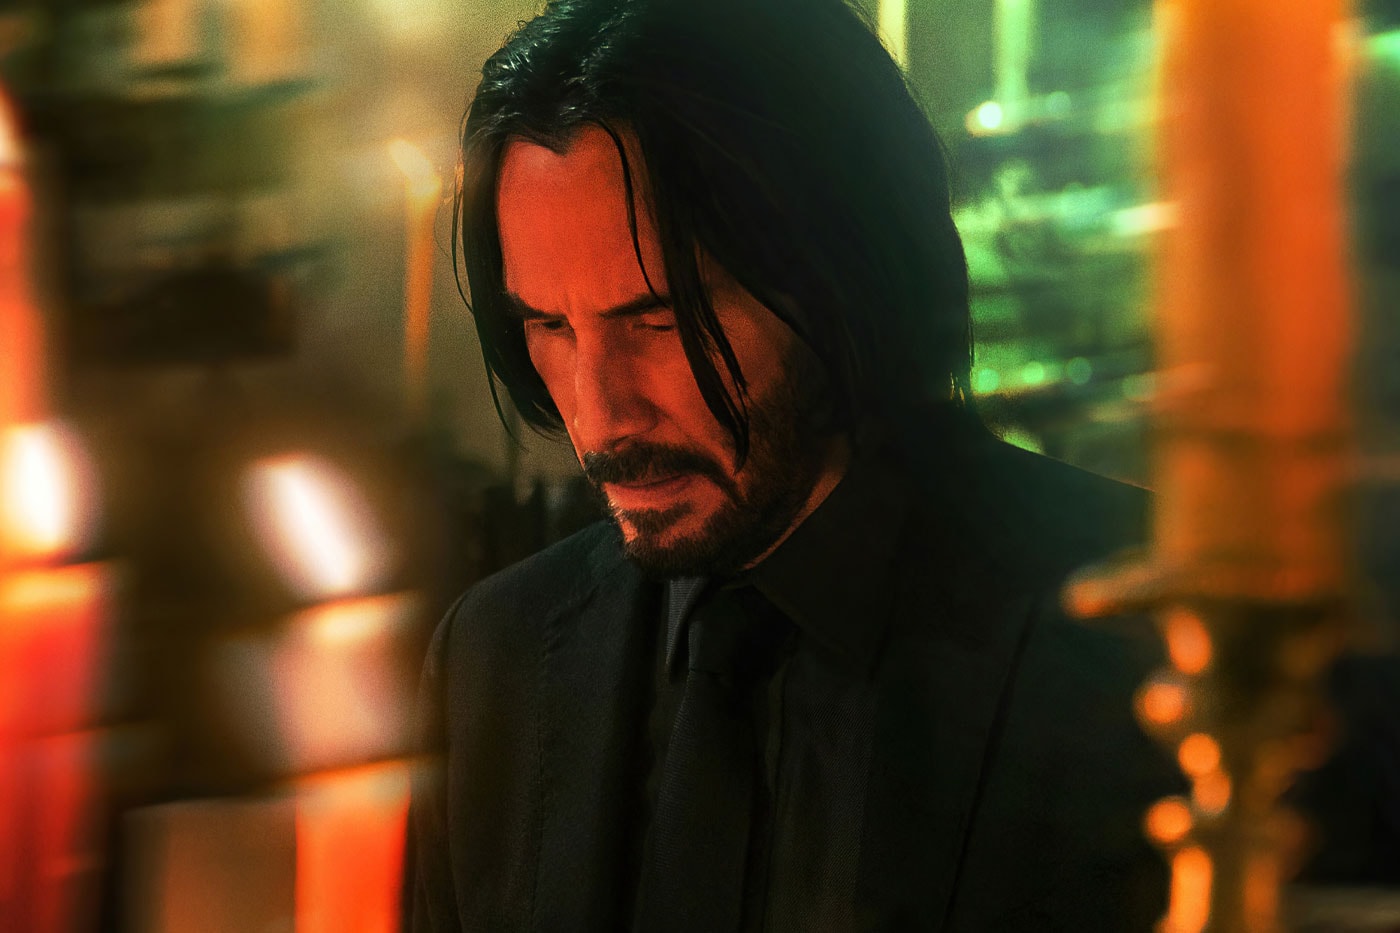 John Wick 4 longest in series three parabellum 2 hours 11 minutes  101 minutes tyler bates keanu reaves Chad Stahelski collider interview info